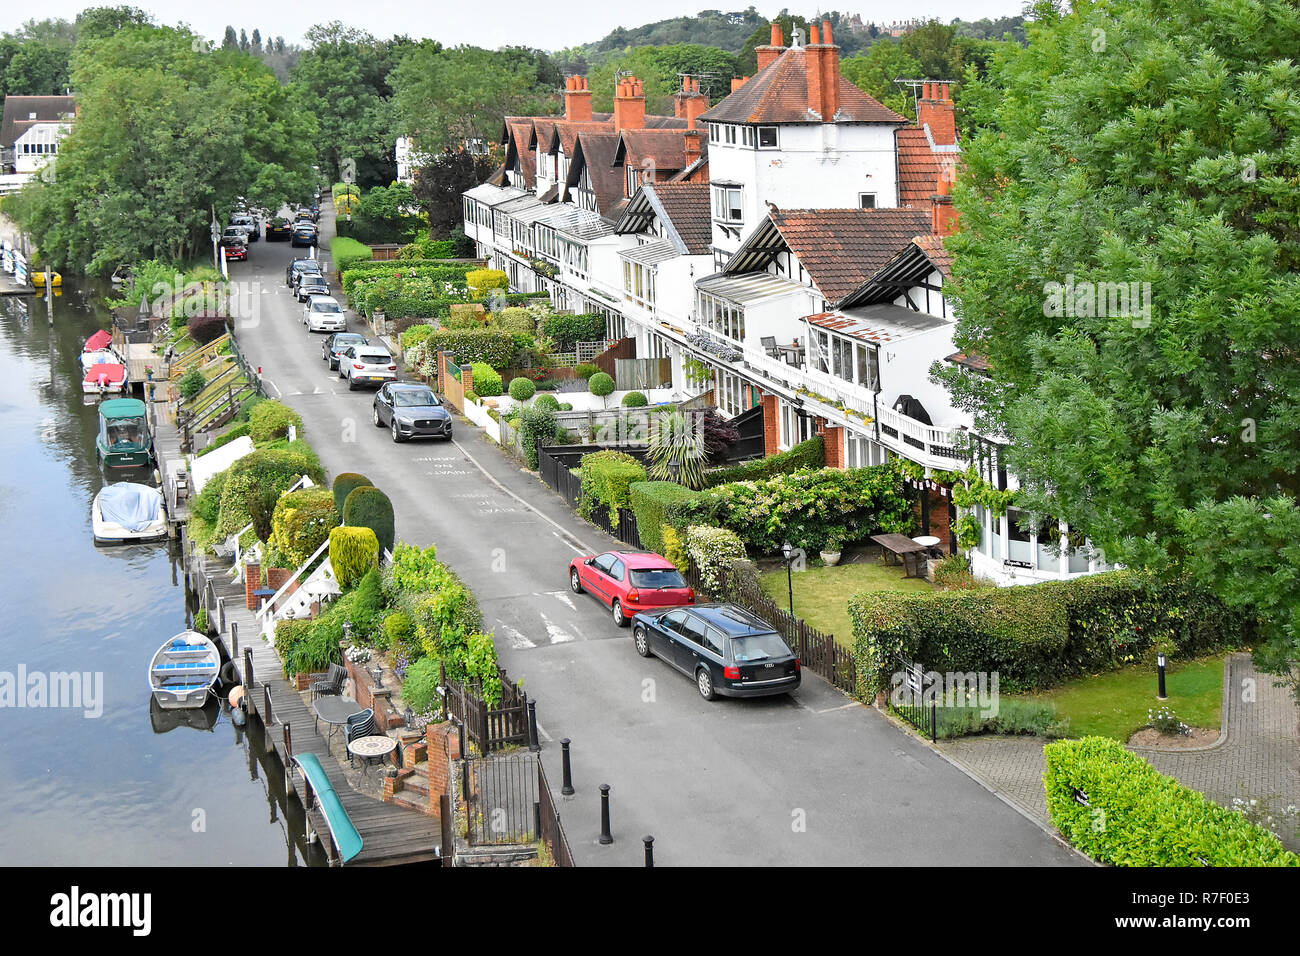 Looking down from above small boats moored on River Thames close to riverside house & car parking on private road Taplow Buckinghamshire England UK Stock Photo